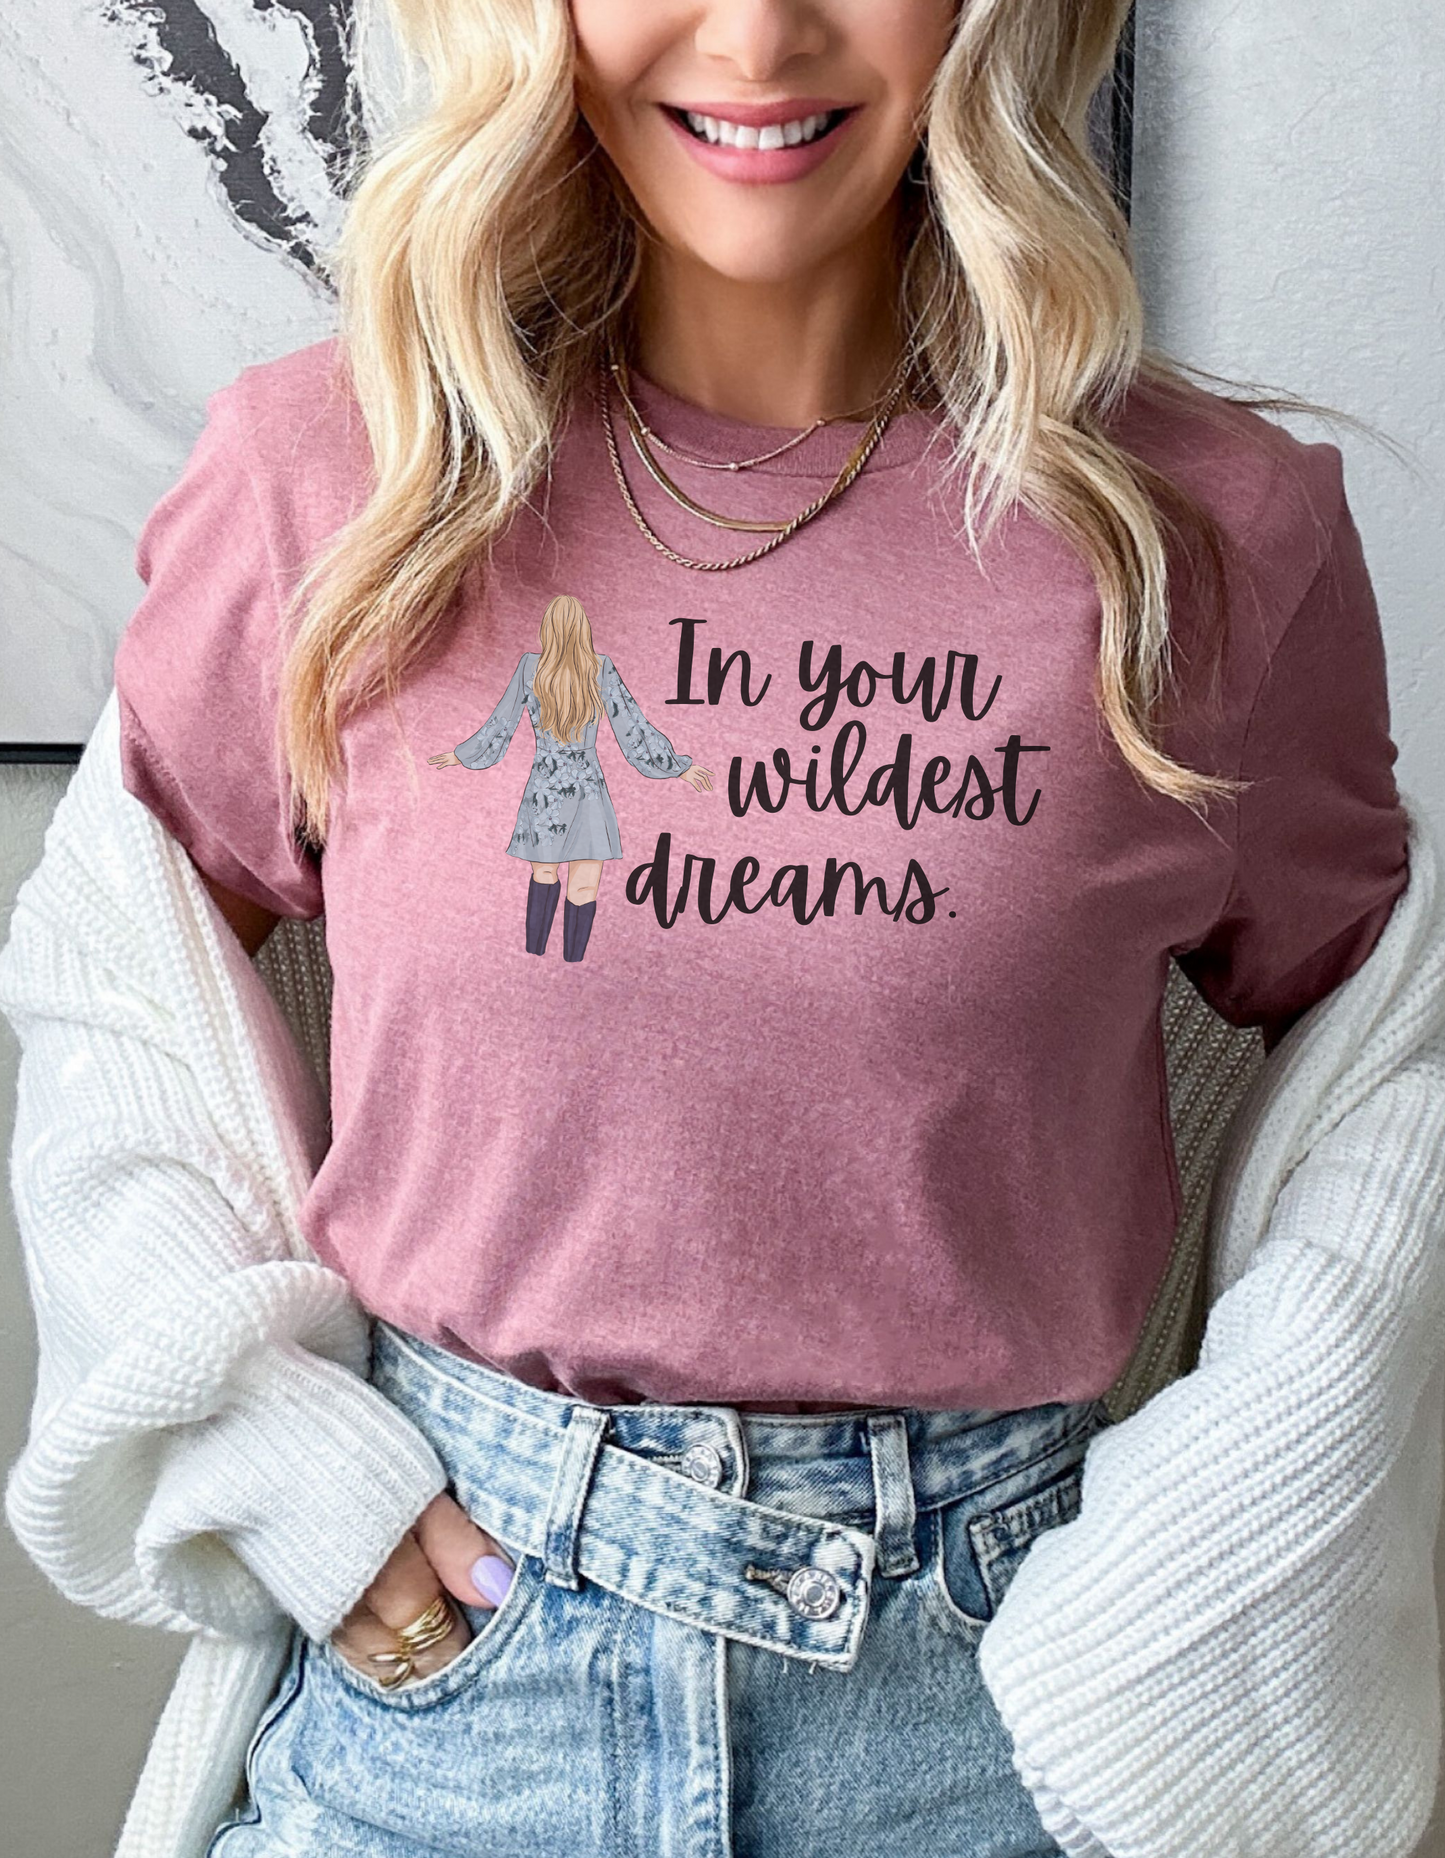 Taylor Swift Preppy Picture T-Shirt - In Your Wildest Dreams